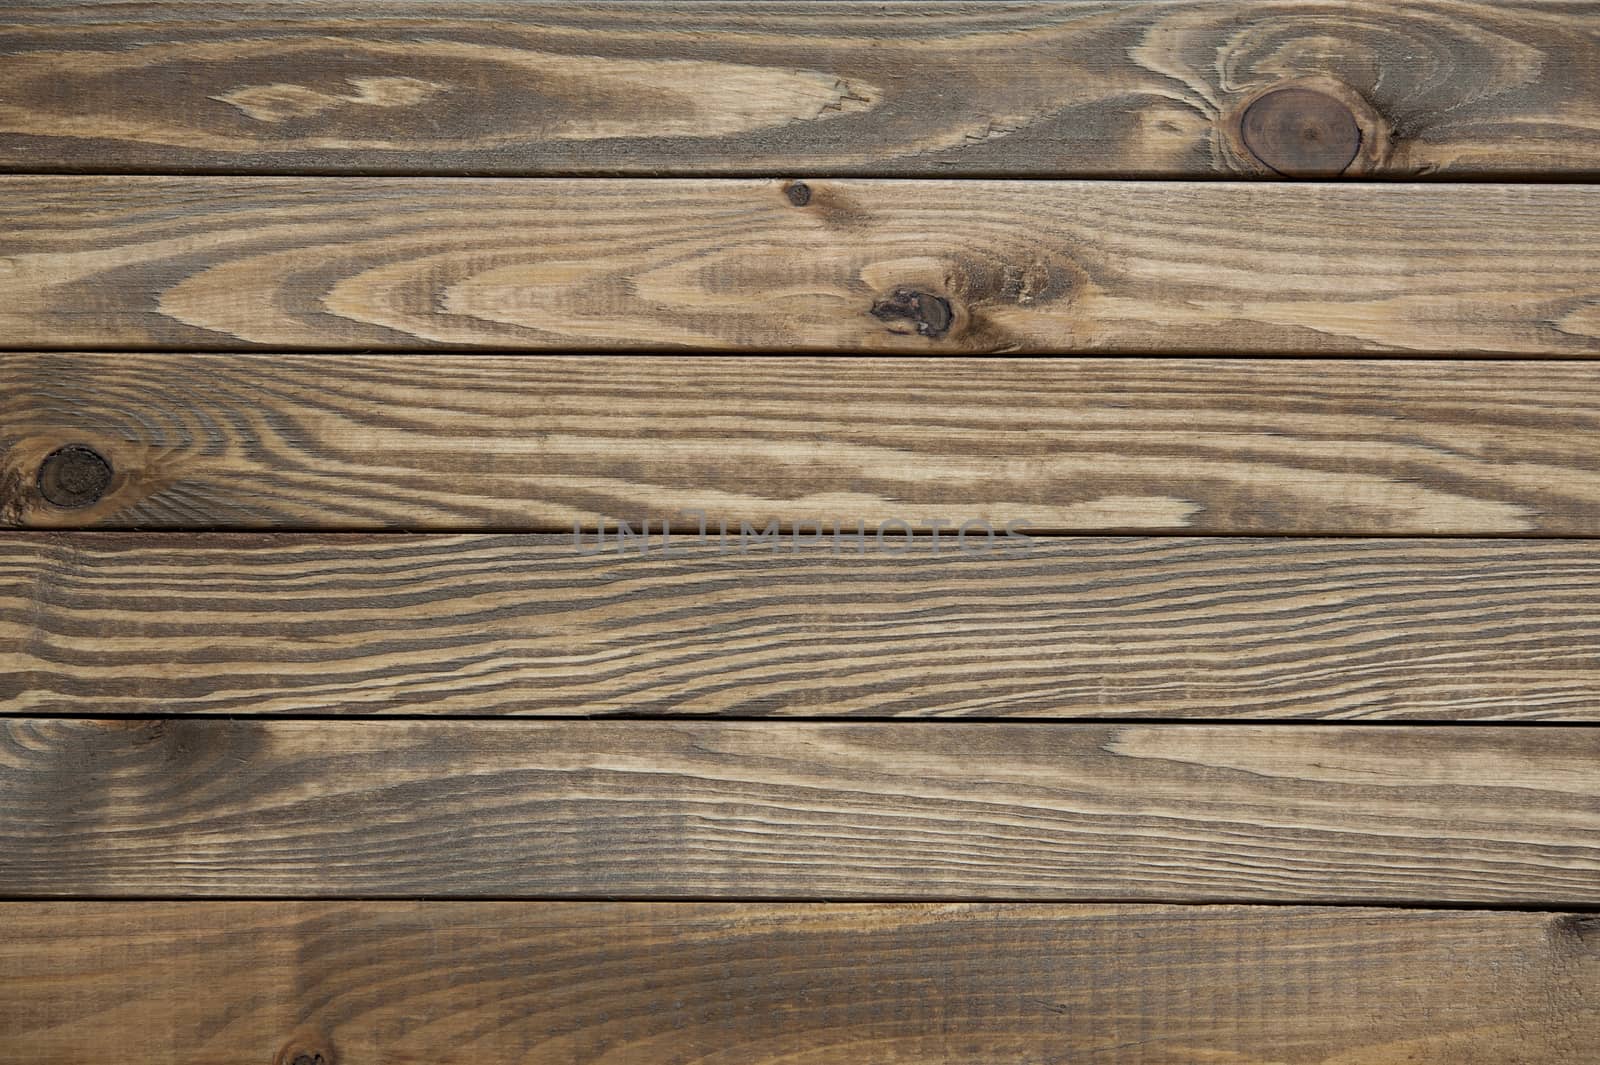 Rustic wood background by jrkphoto